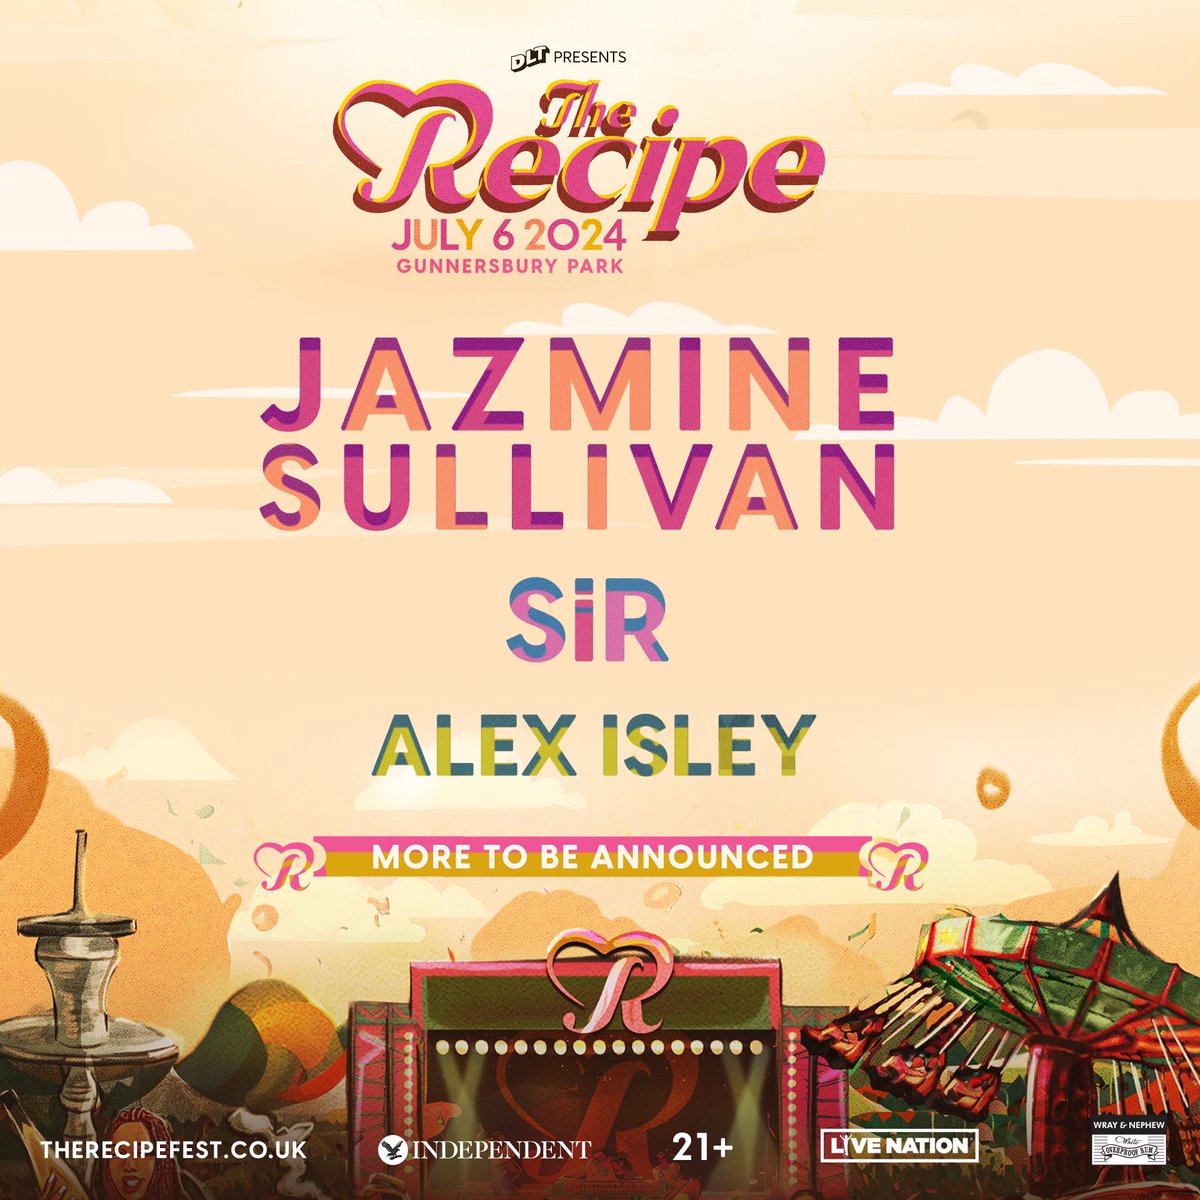 Jazmine Sullivan is set to be performing along with SiR and Alex Isley at DLT’s new all-inclusive 21+ festival: The Recipe! Saturday 6th of July at Gunnersbury Park, be sure to follow @dltbrunch for updates. General sale goes live 10am Friday 5th April at ticketmaster.co.uk/dlt-presents-t…